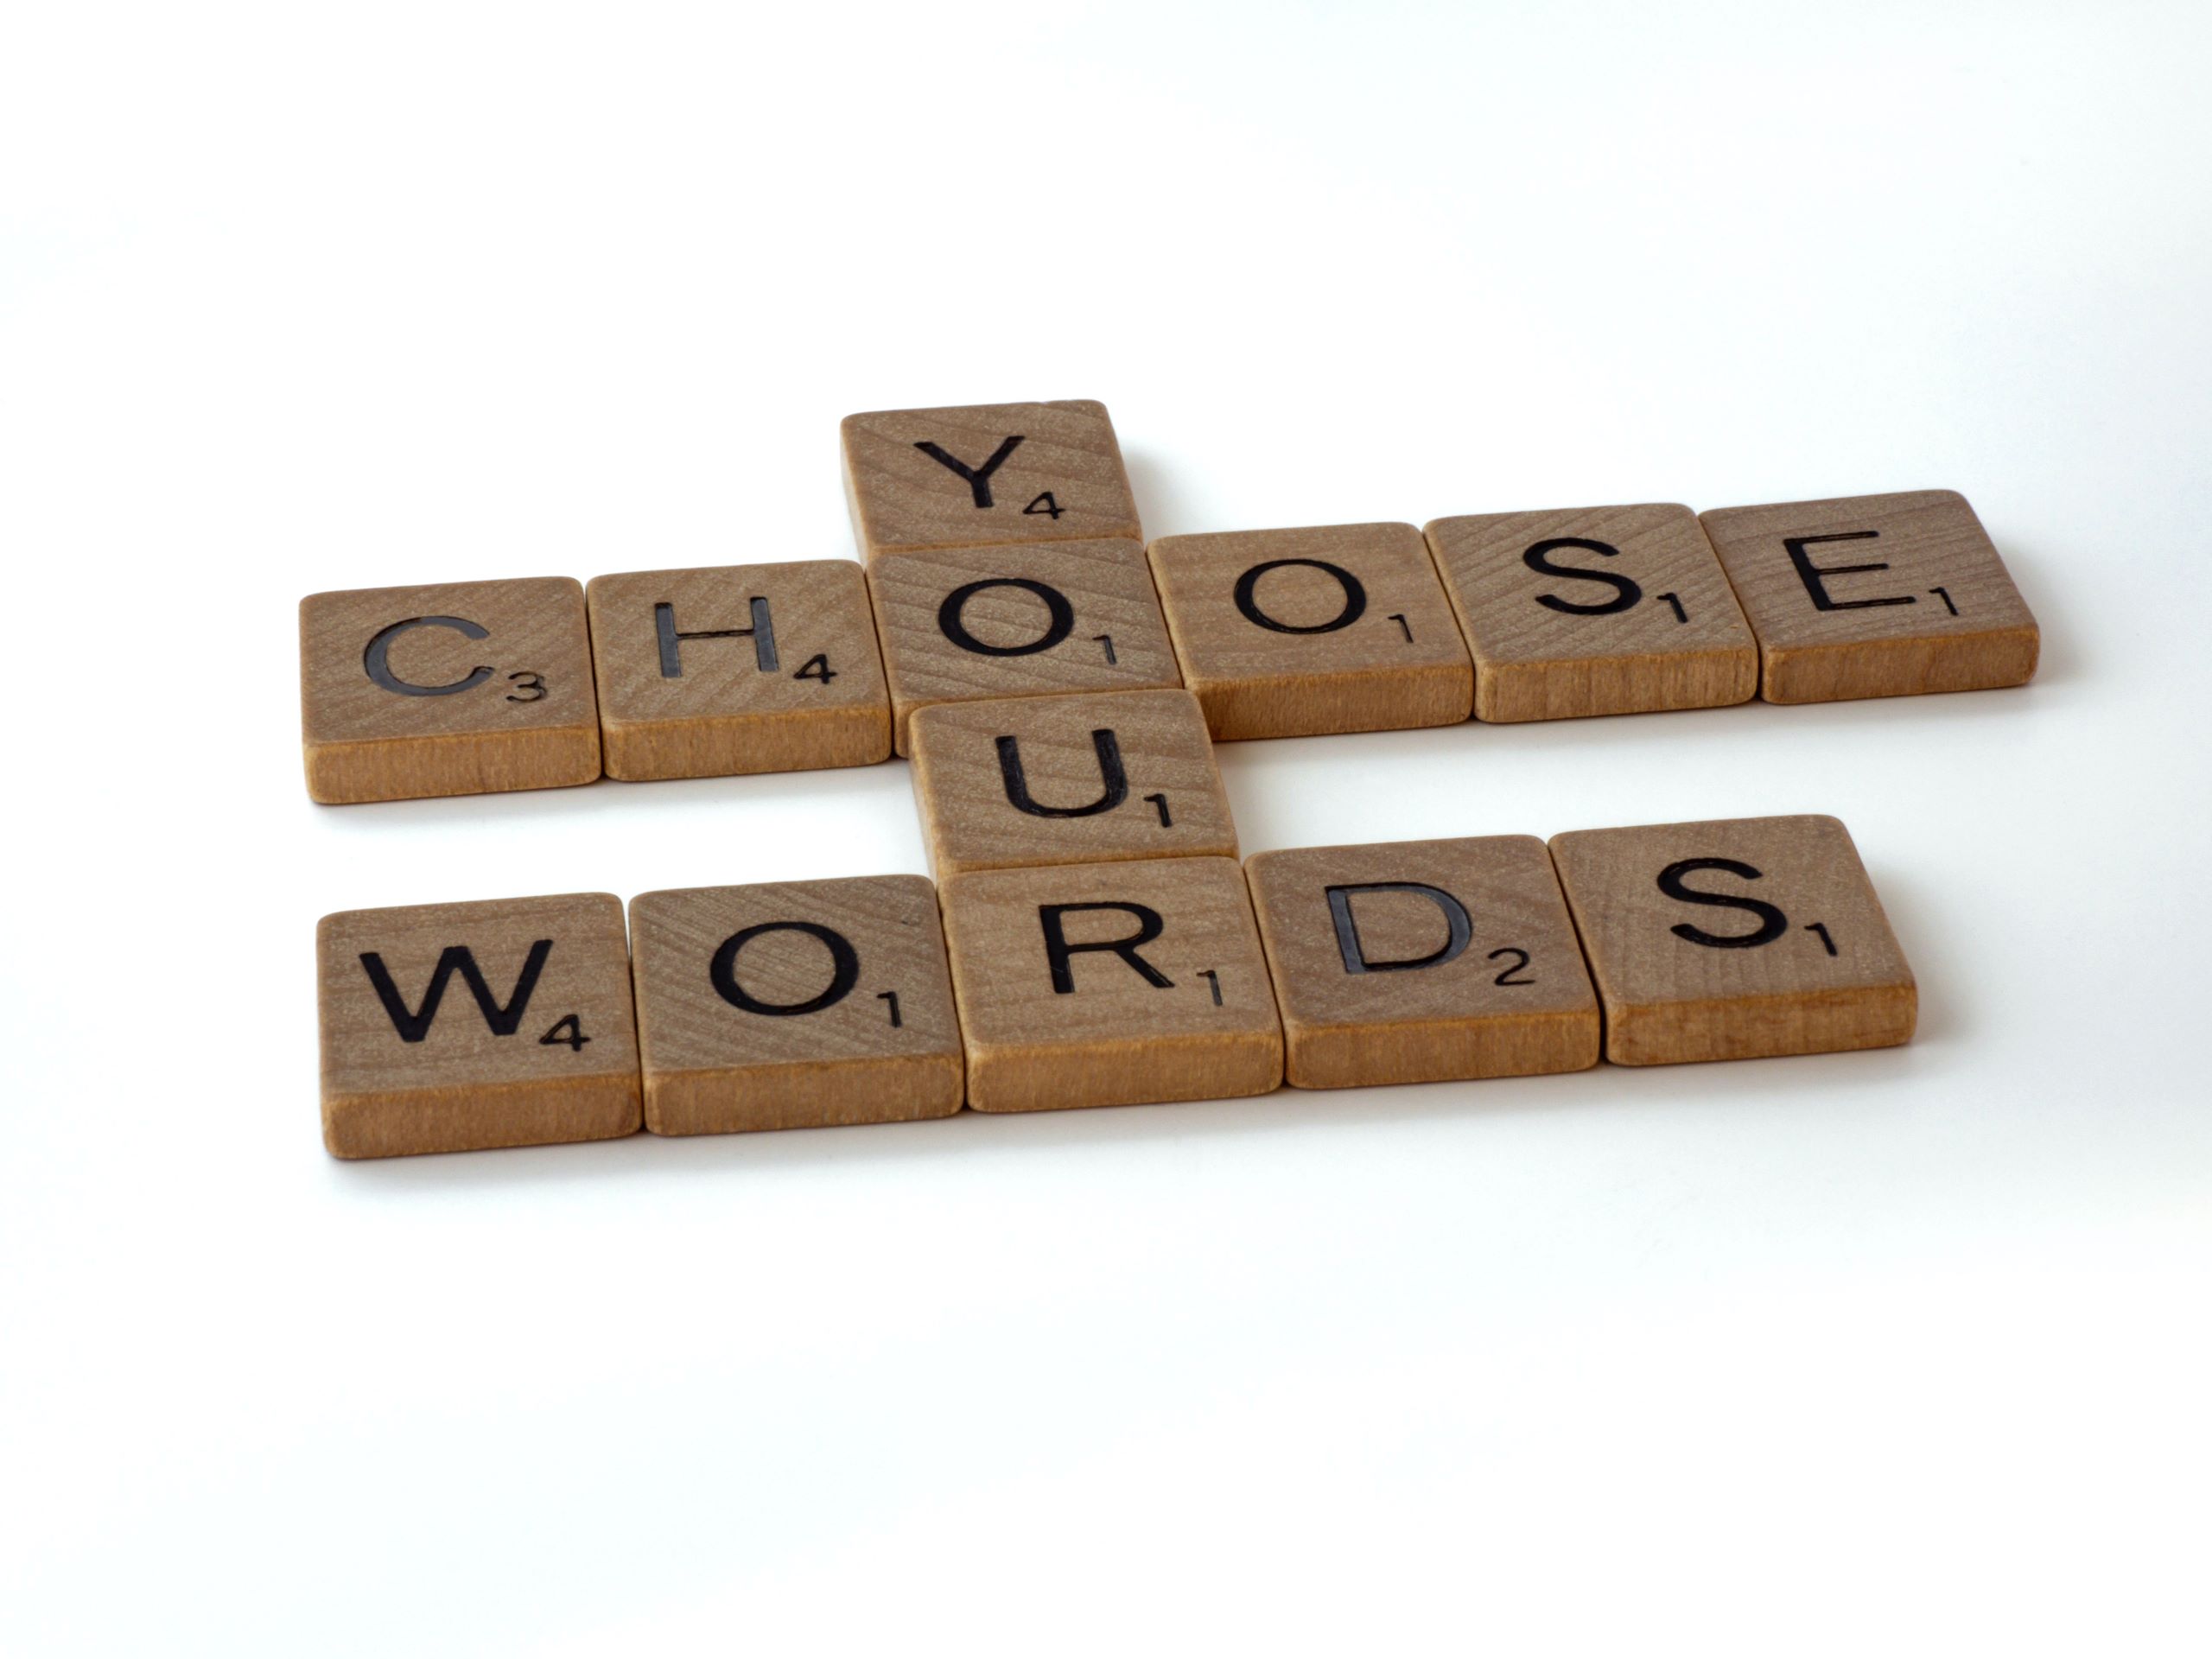 Scrabble tiles spelling the words "Choose your words"